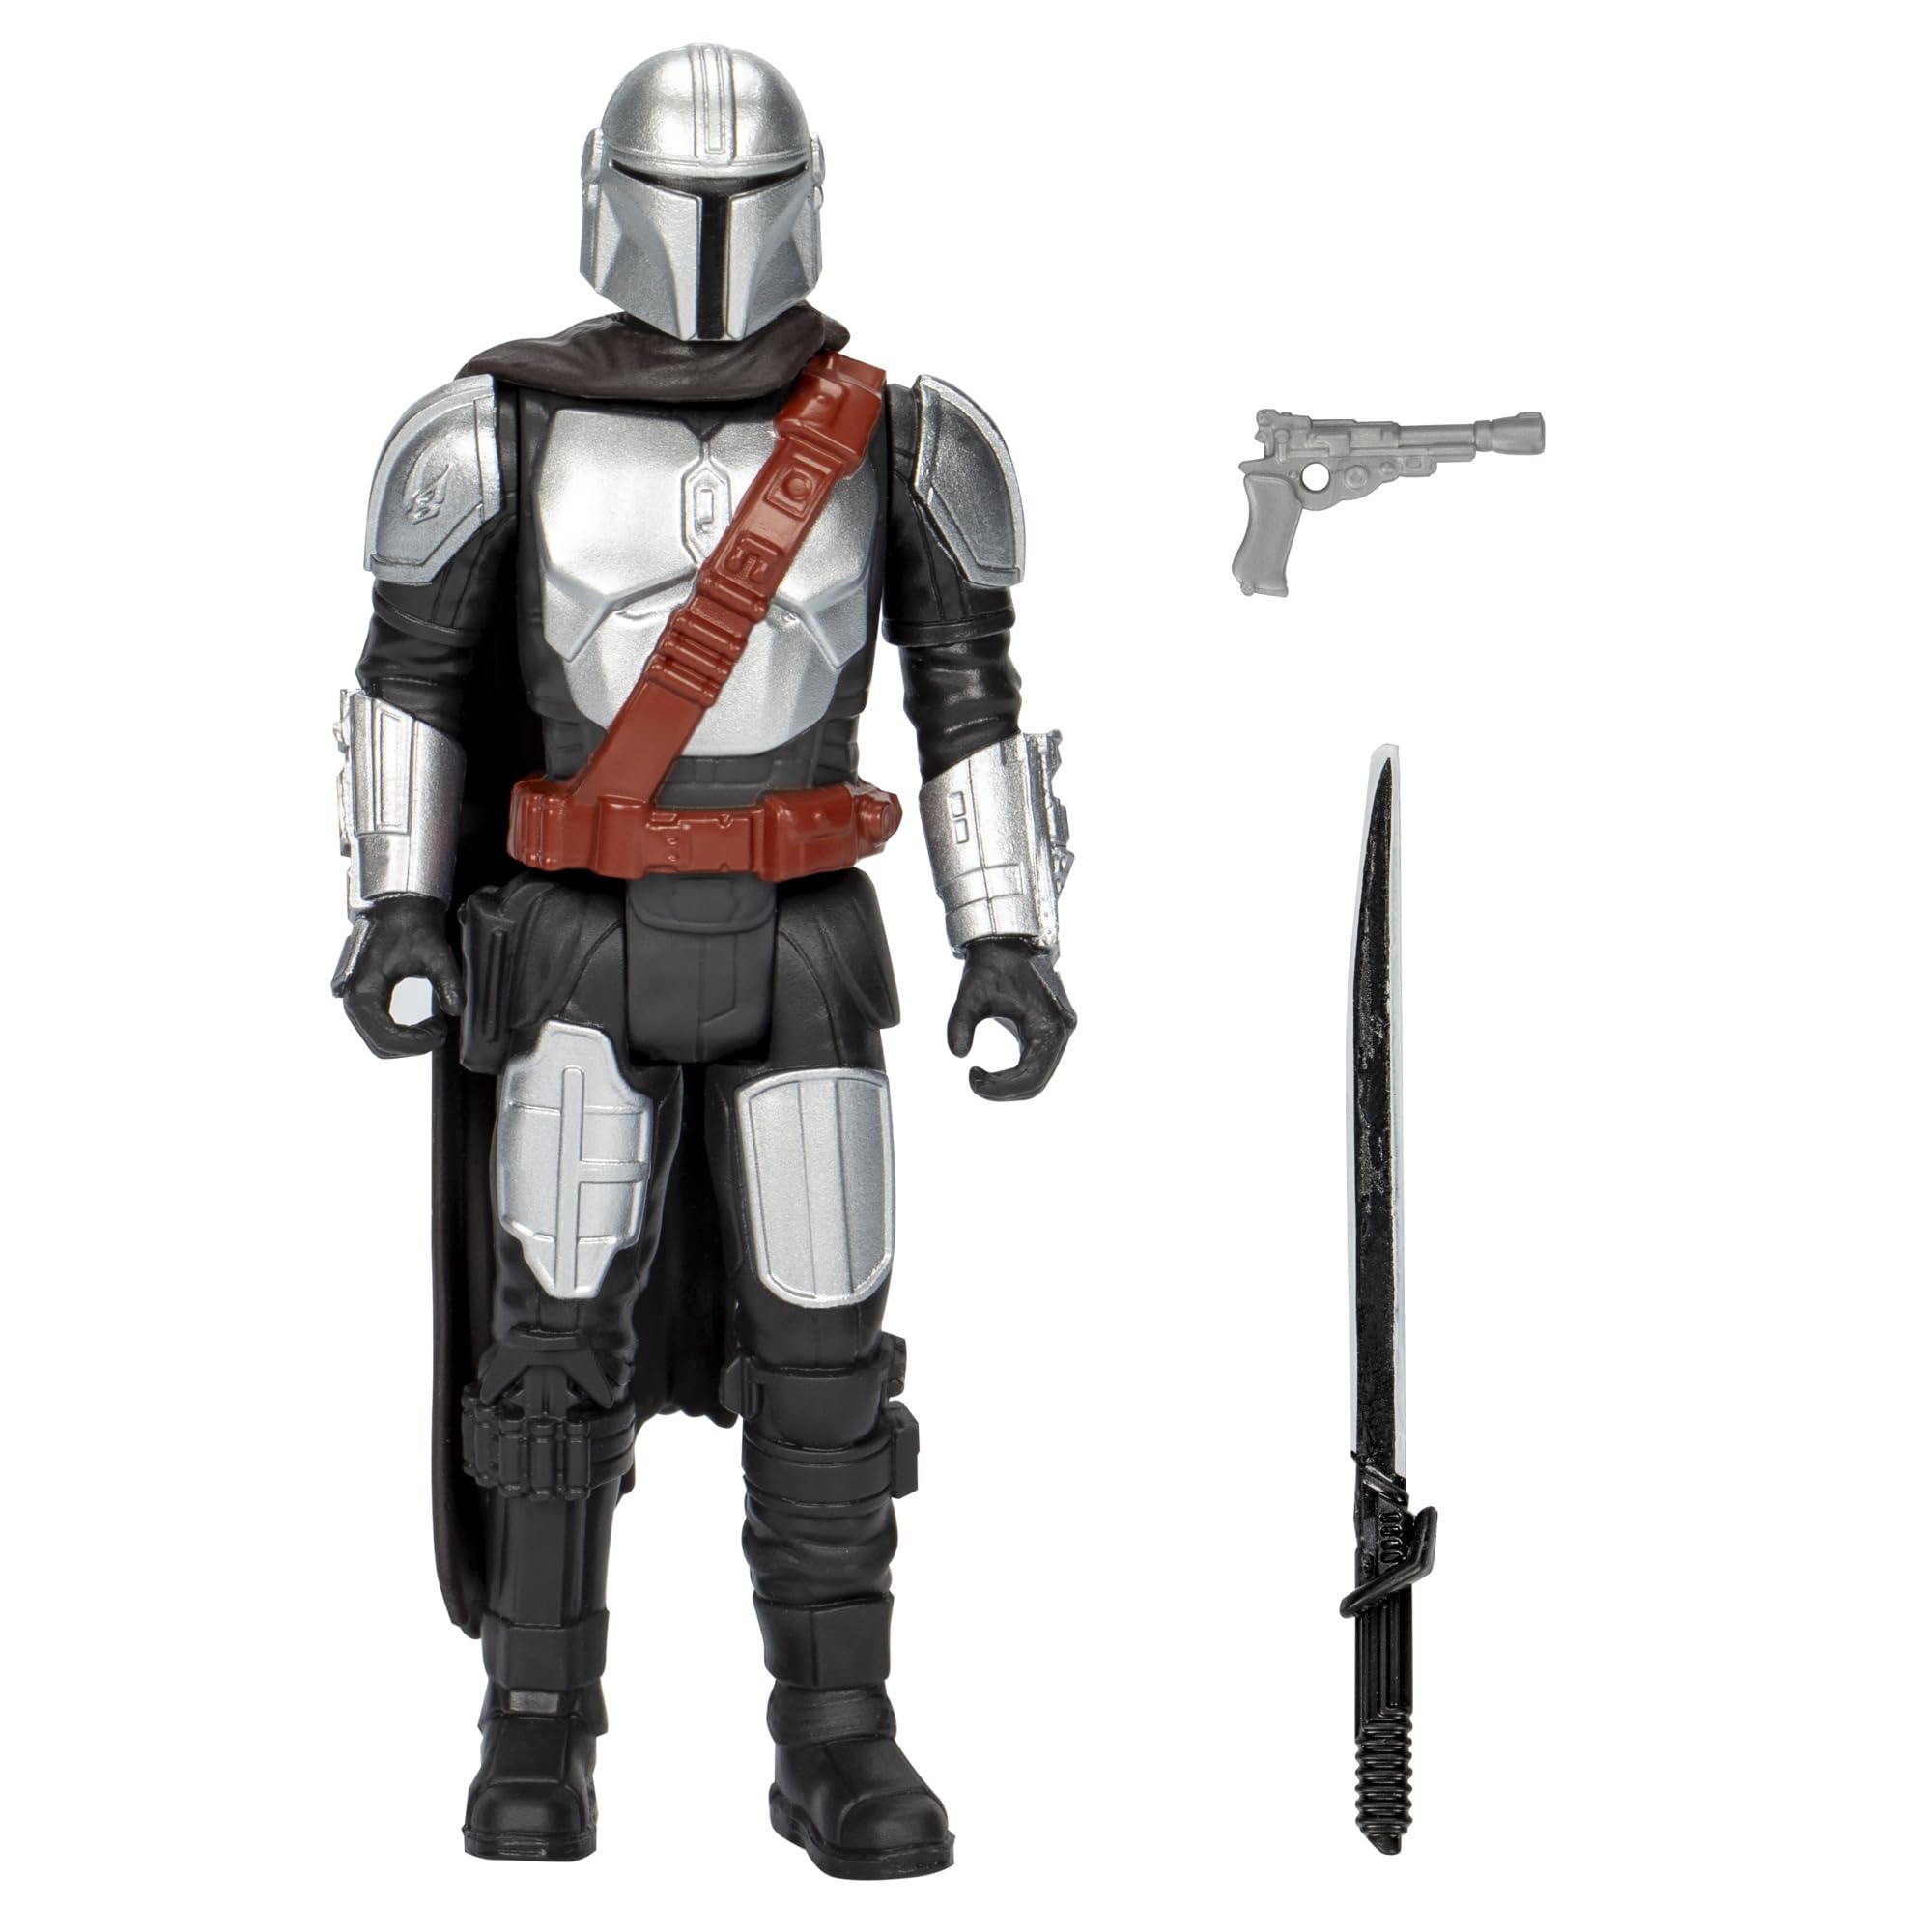 STAR WARS Epic Hero Series The Mandalorian 4-Inch Action Figure & 2 Accessories, Toys for 4 Year Old Boys and Girls